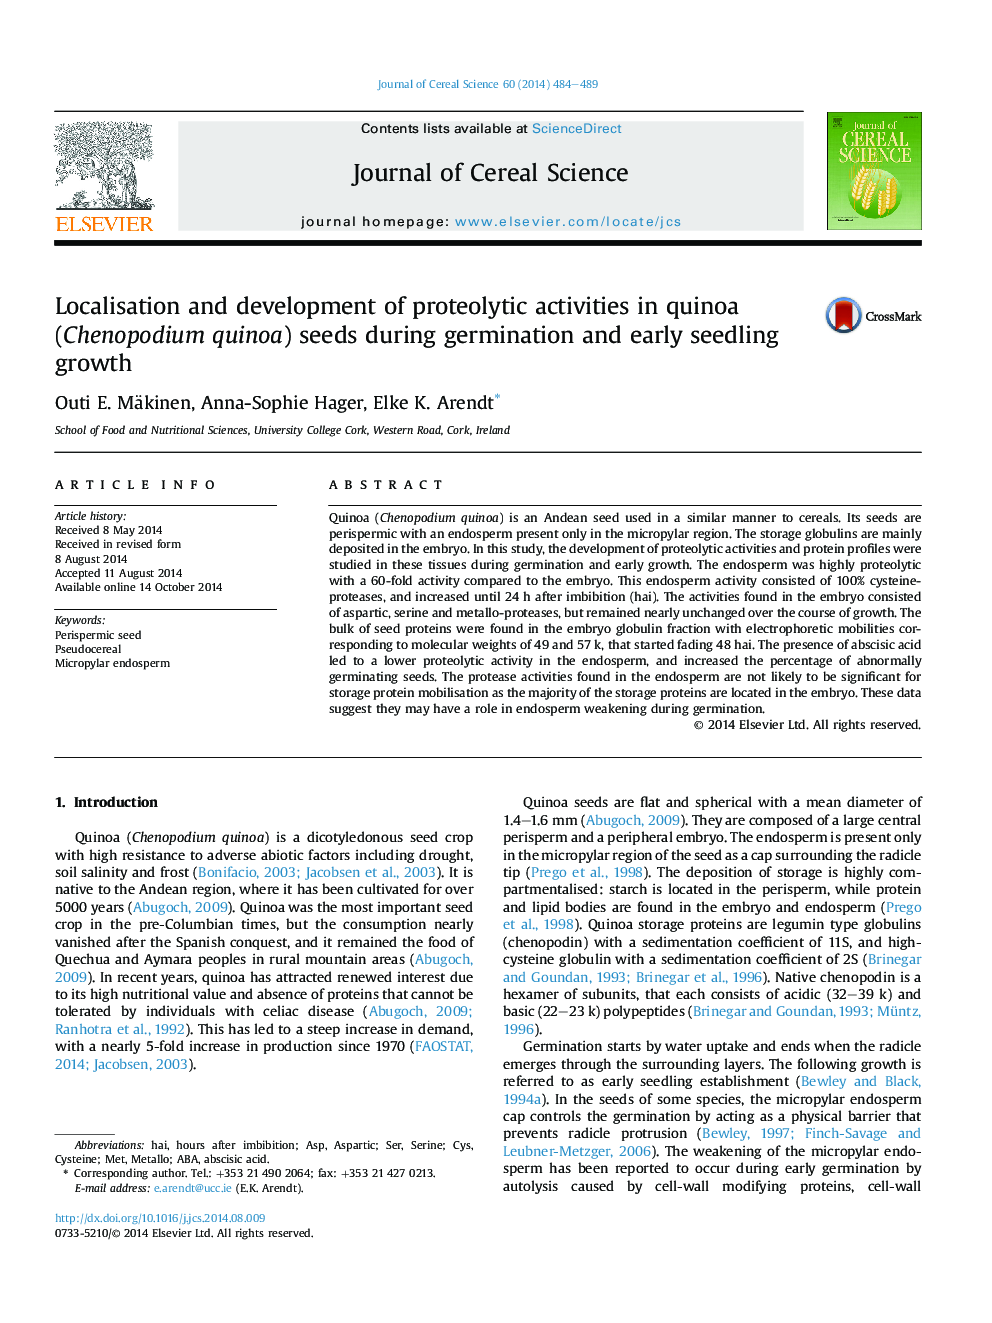 Localisation and development of proteolytic activities in quinoa (Chenopodium quinoa) seeds during germination and early seedling growth